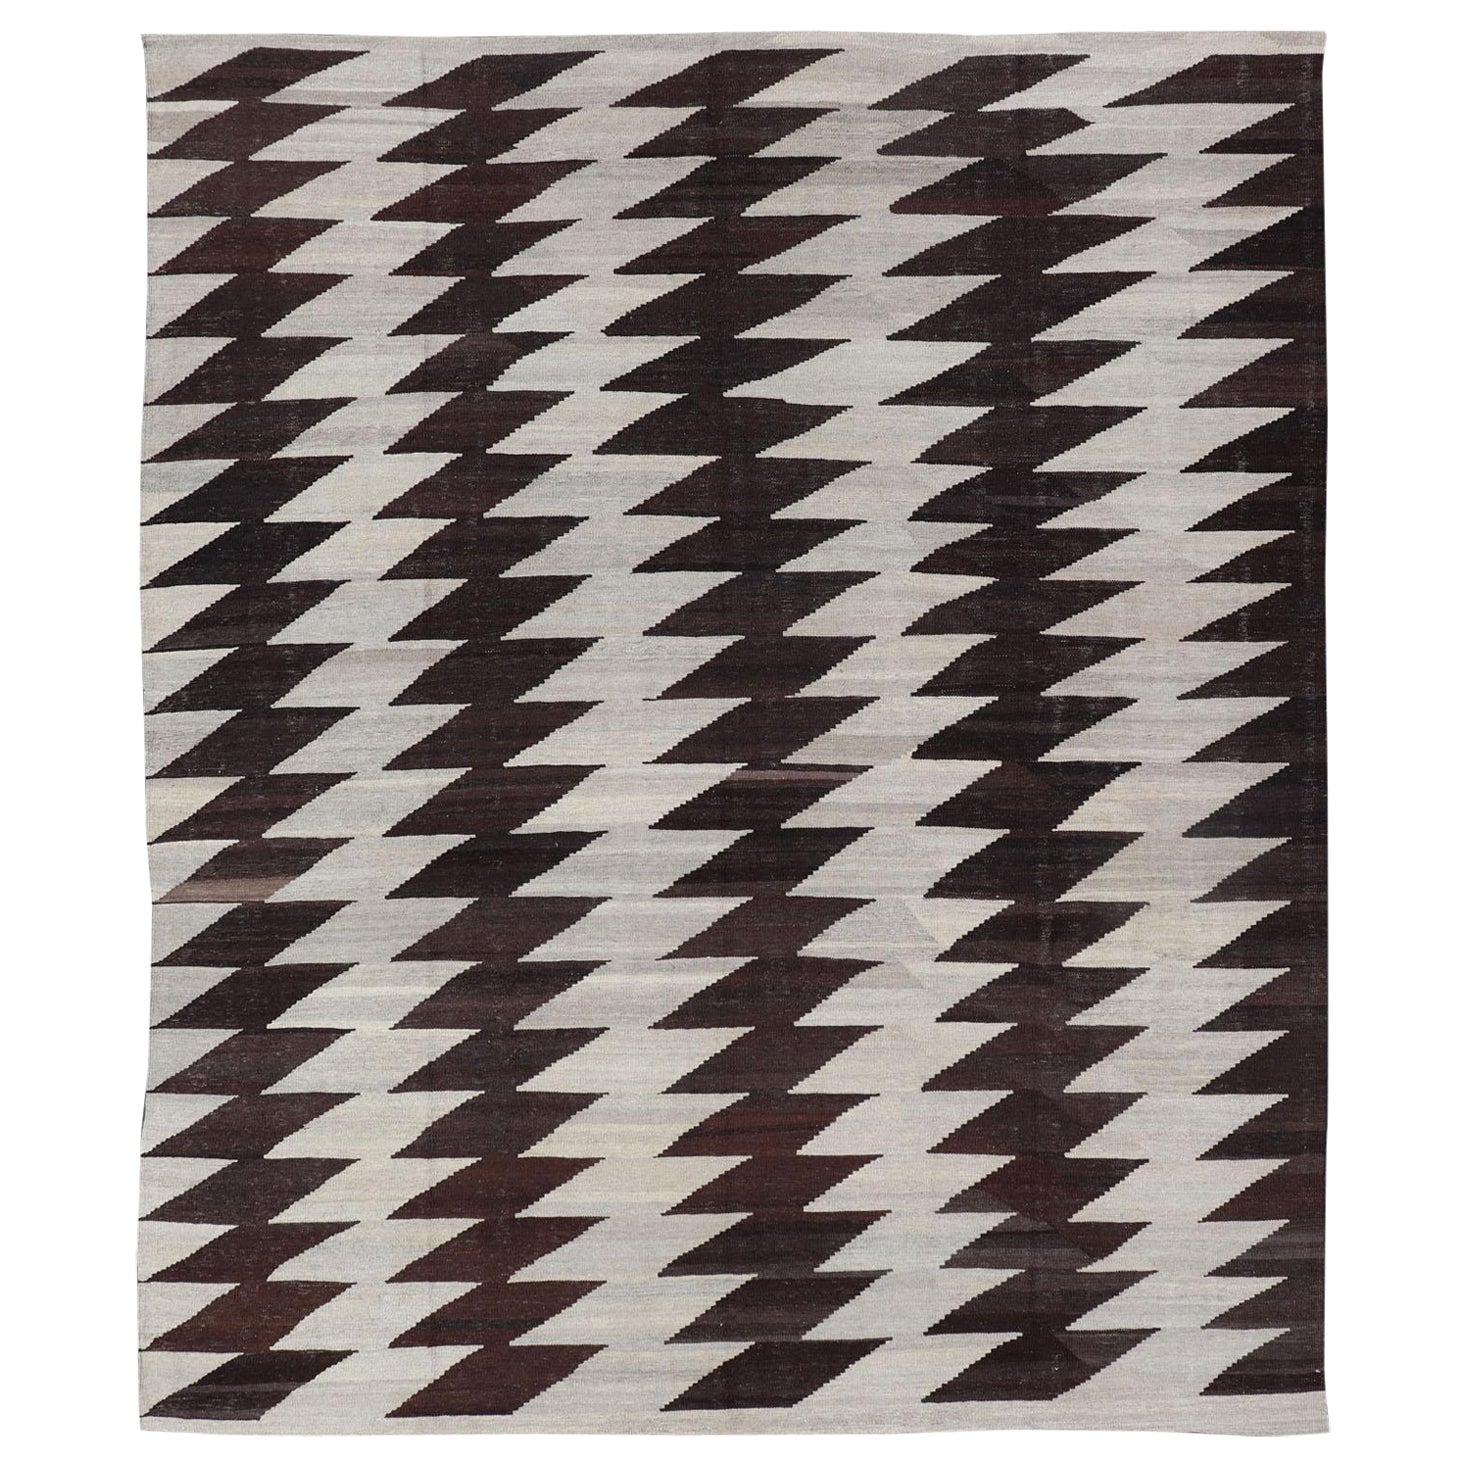 Afghanistan Kilim with Modern Design With Browns and Gray For Sale